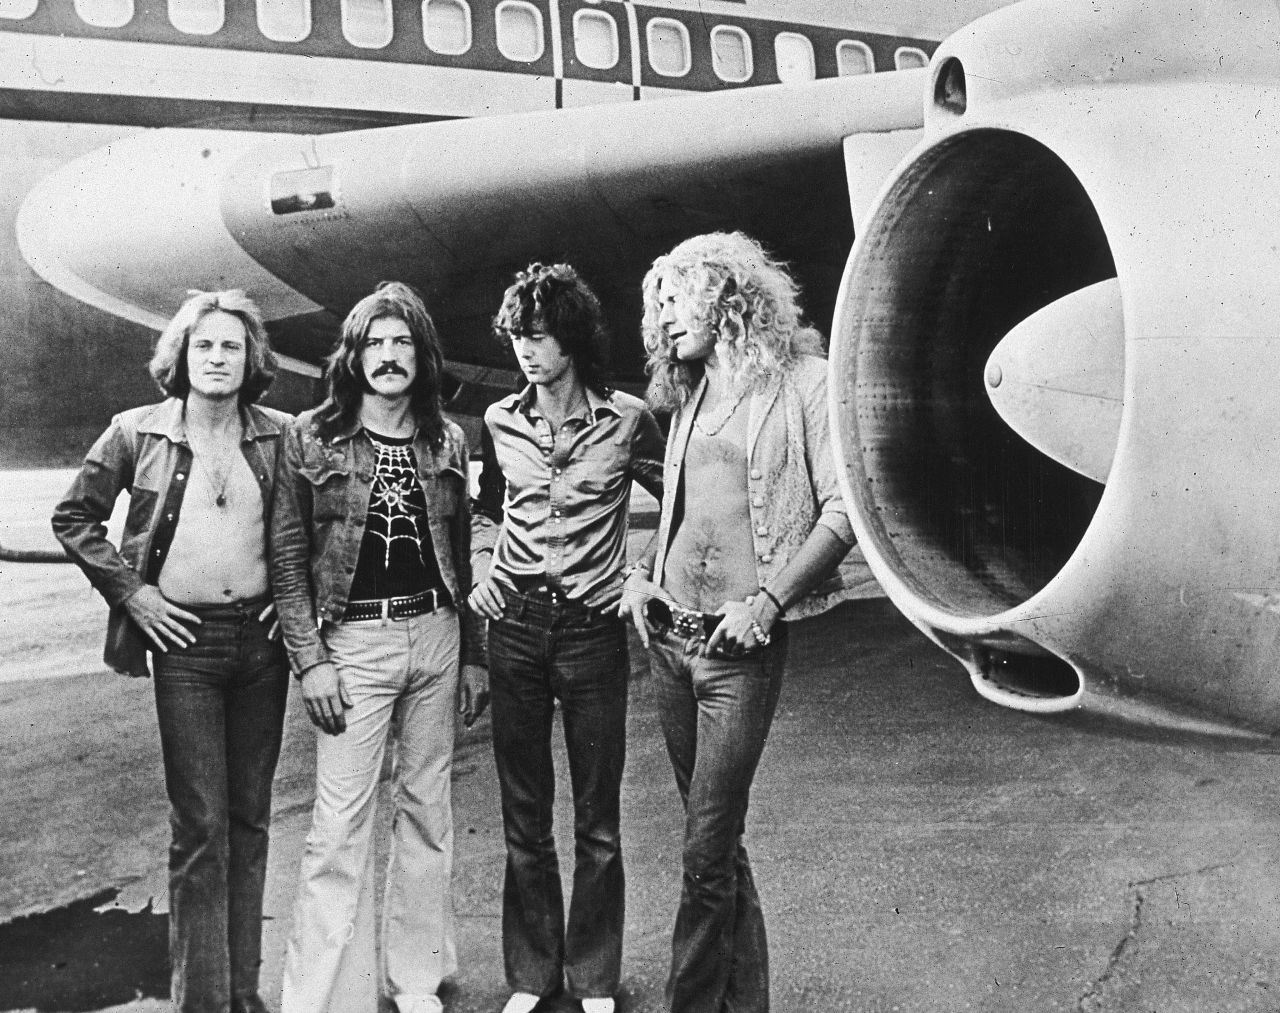 Archetypal '70s rock stars, John Paul Jones, from left, Bonham, Page and Plant use The Starship jet to tour in 1973.